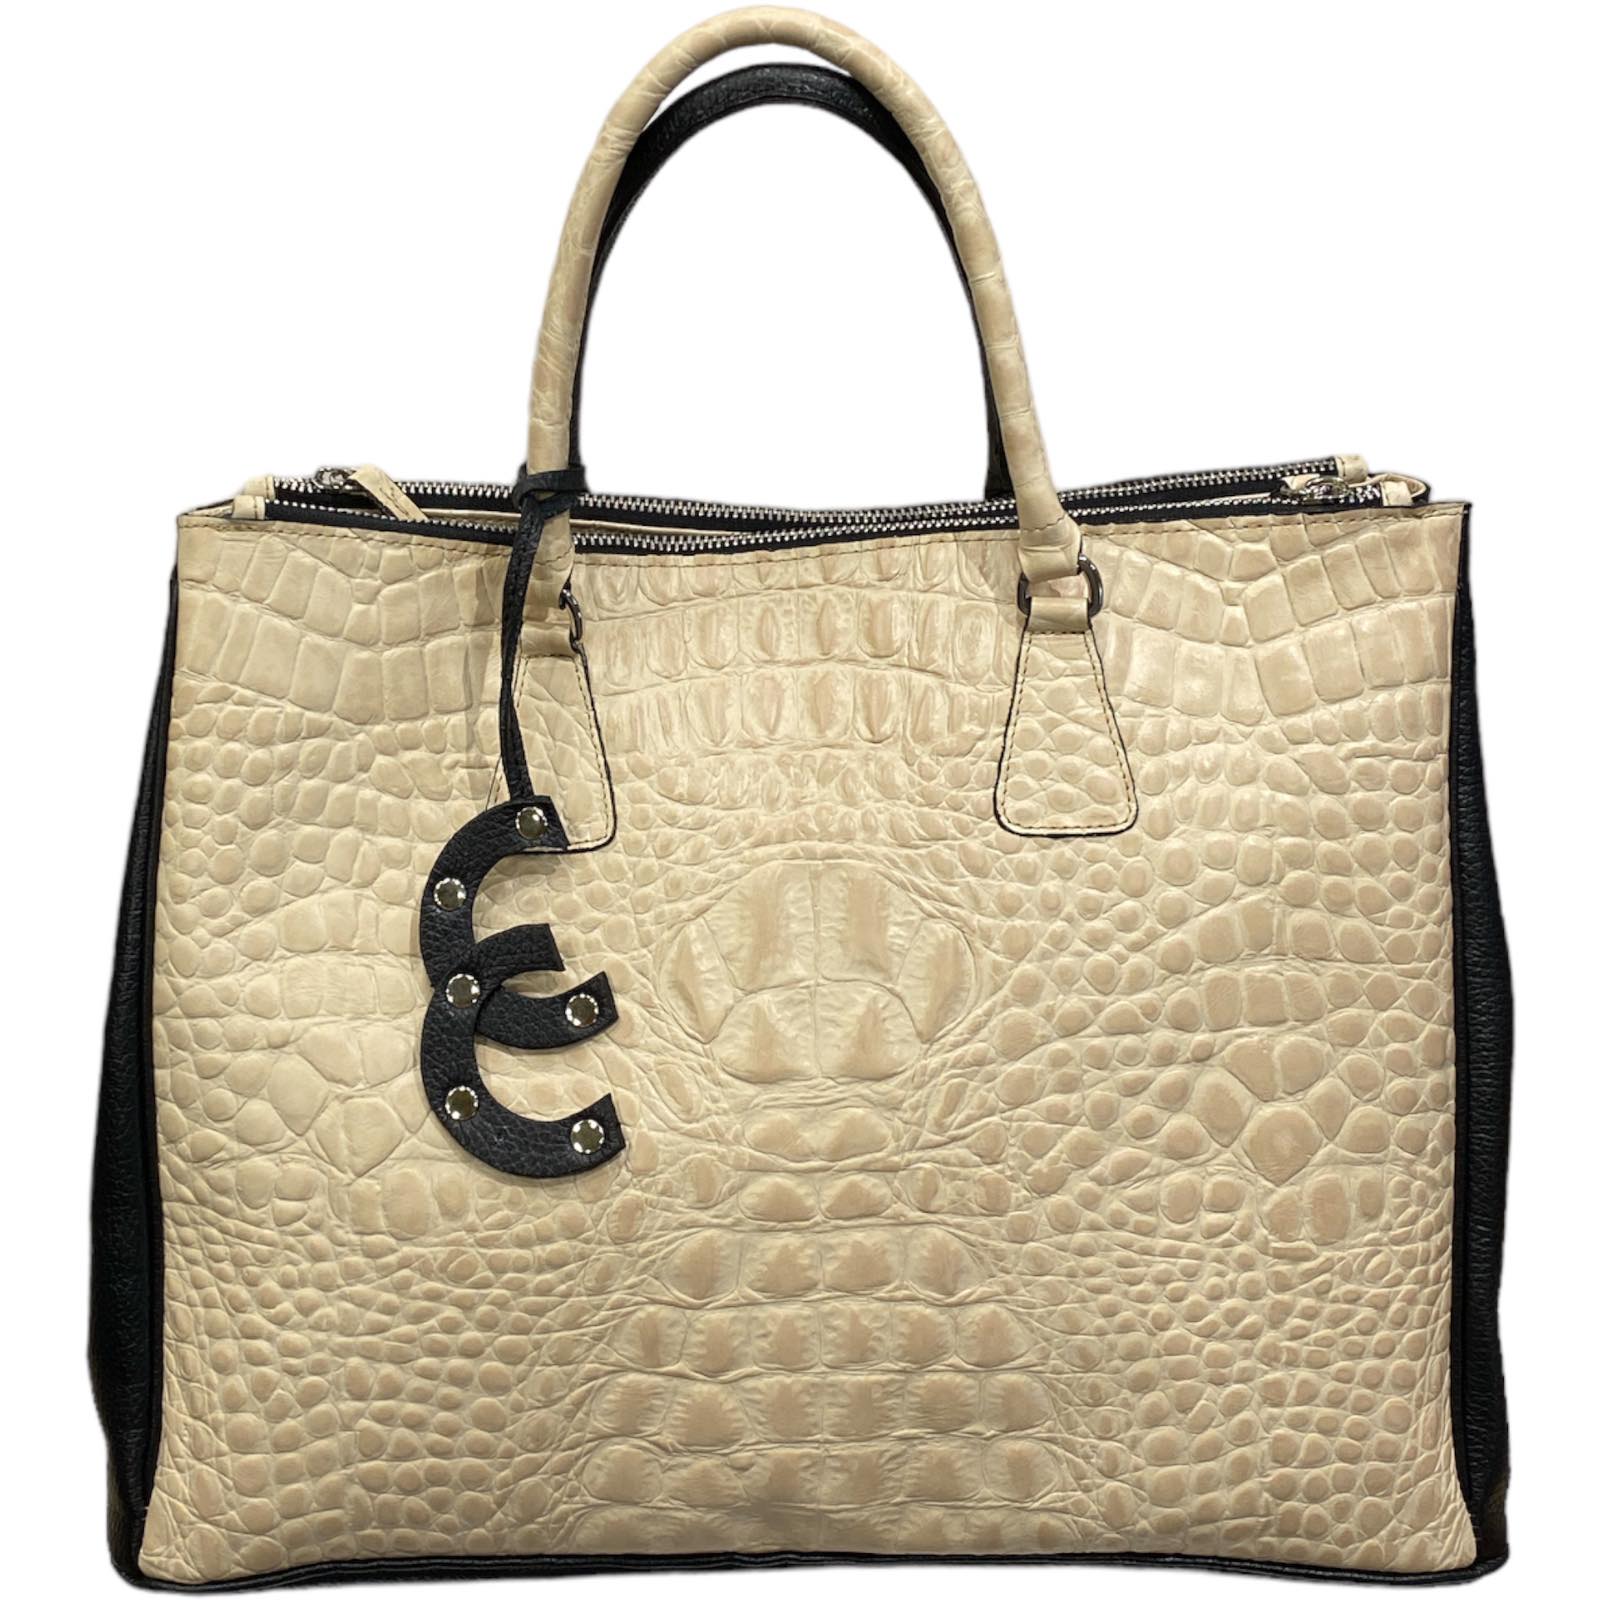 Diana L. Black and beige leather tote bag